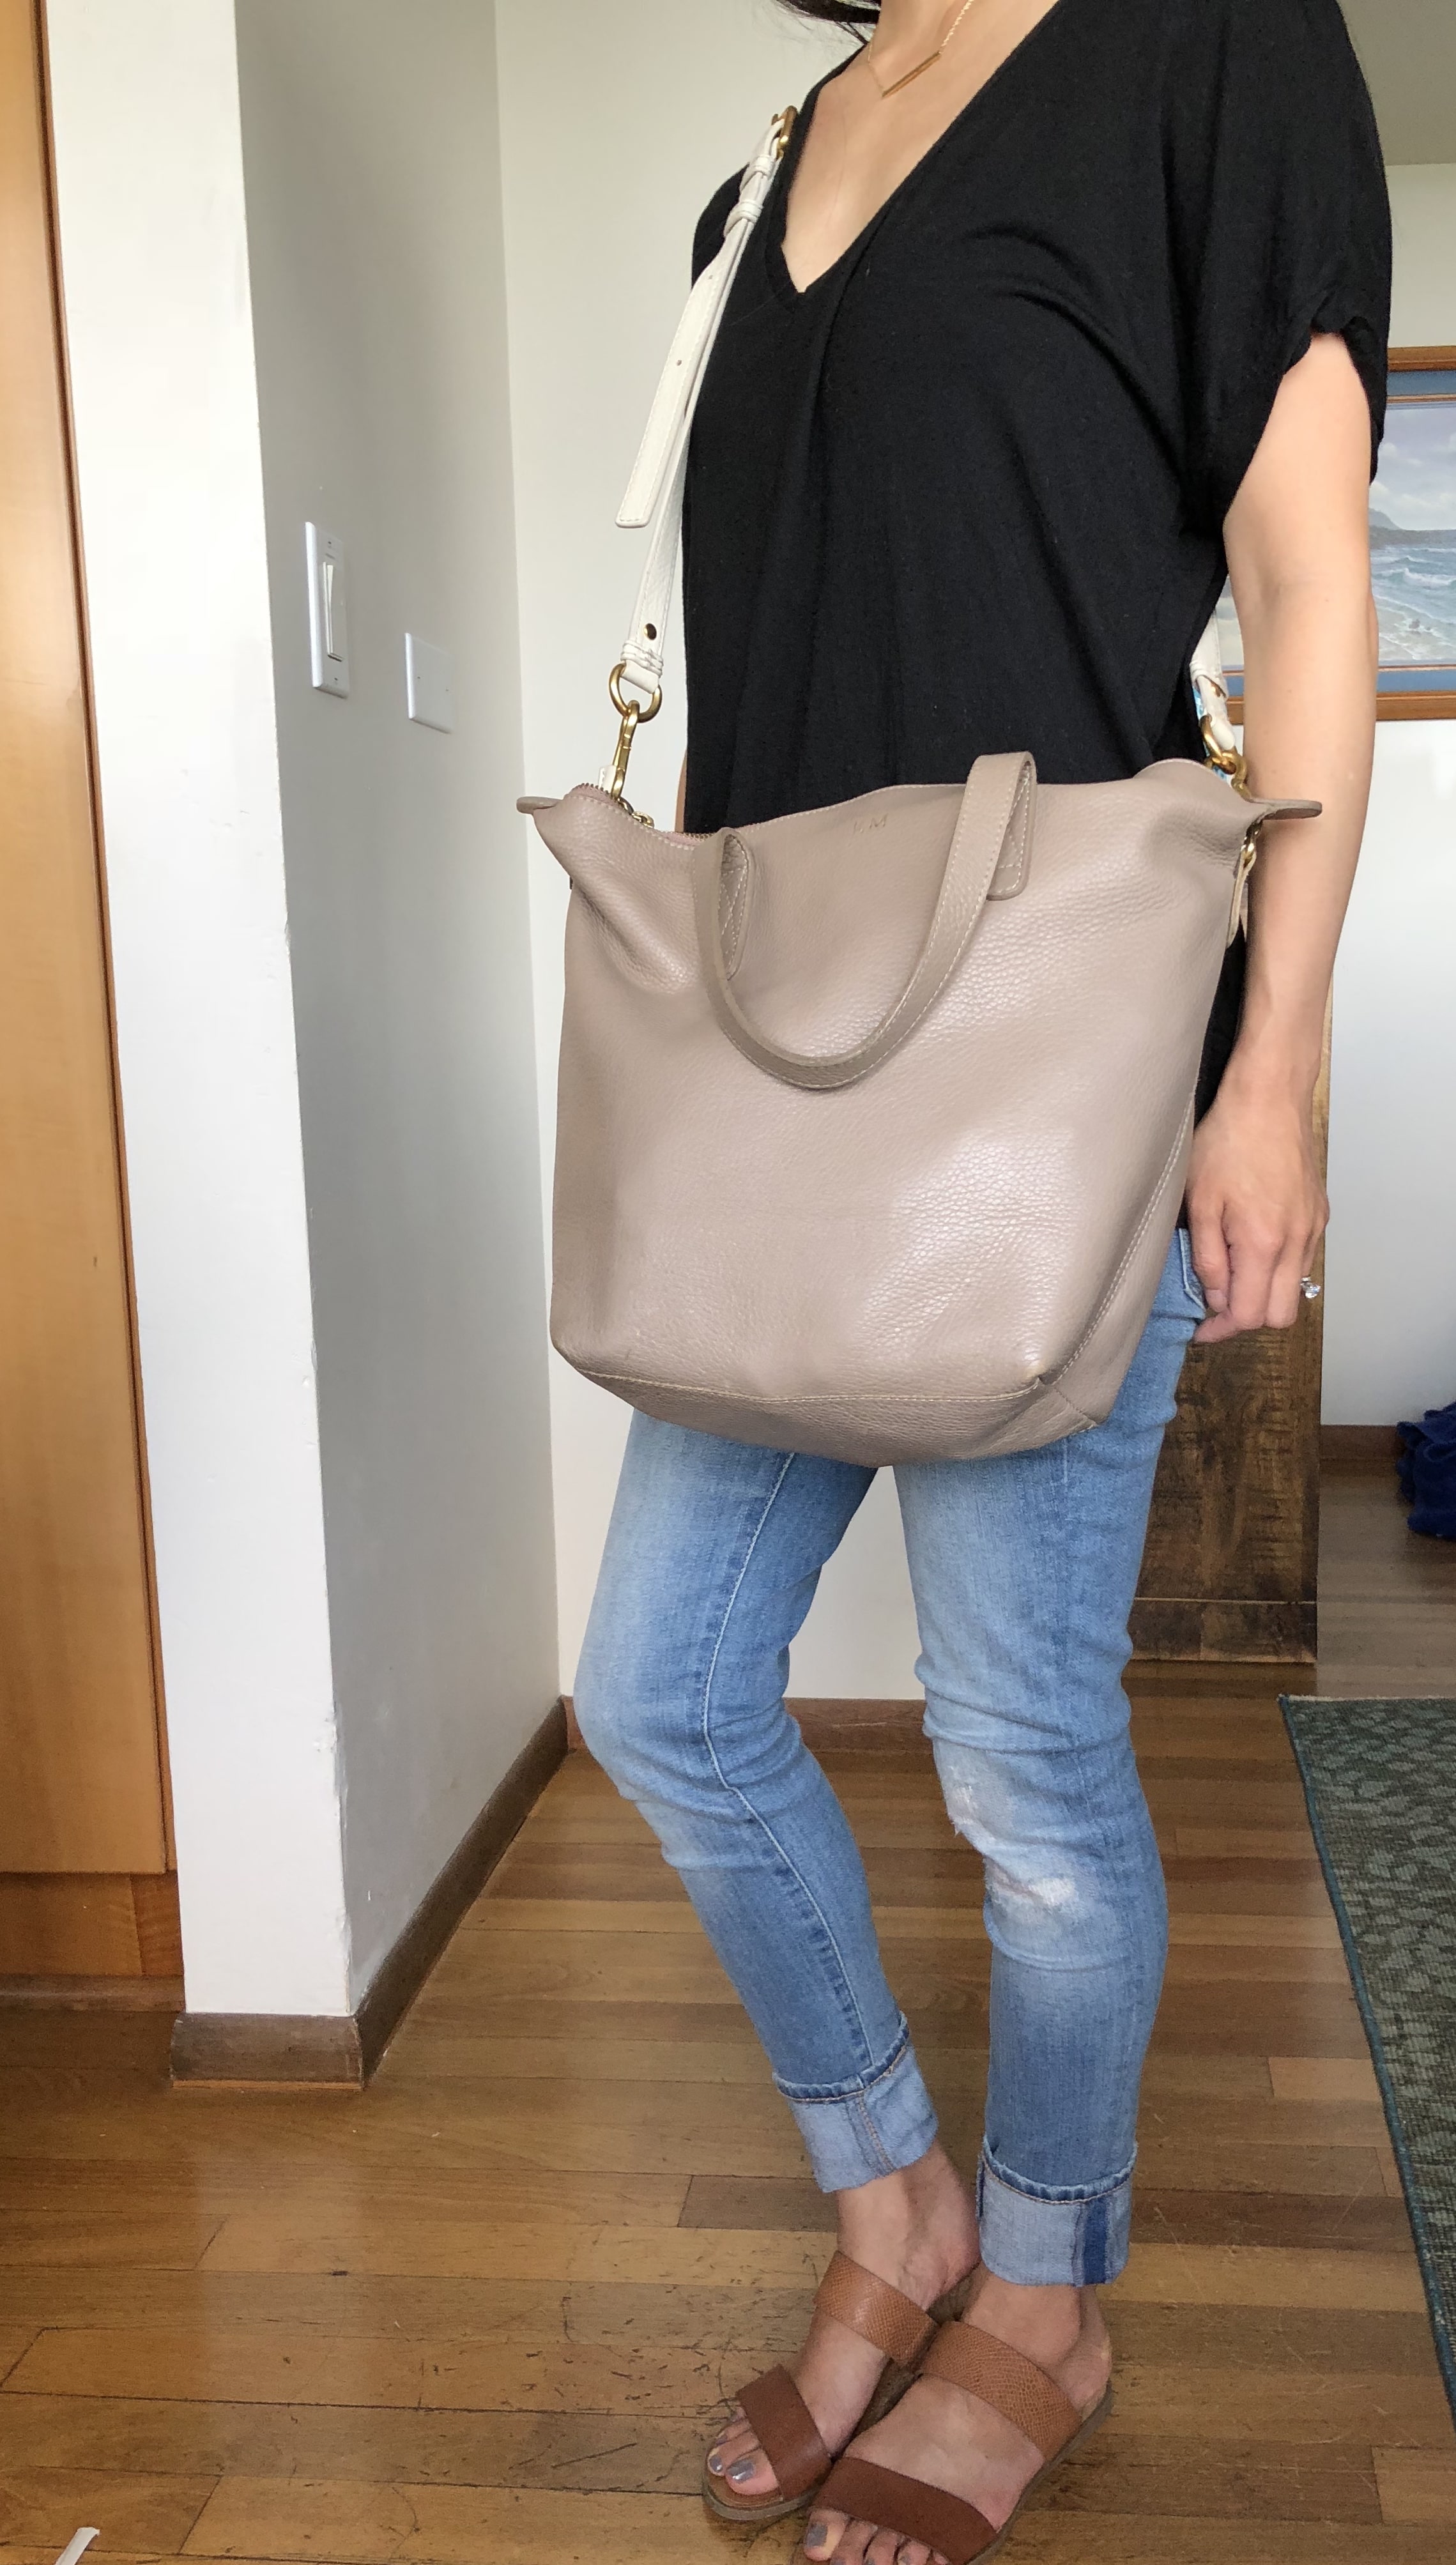 Everlane Market Tote VS Madewell Transport Tote–Which is Right for You? –  Jess Keys